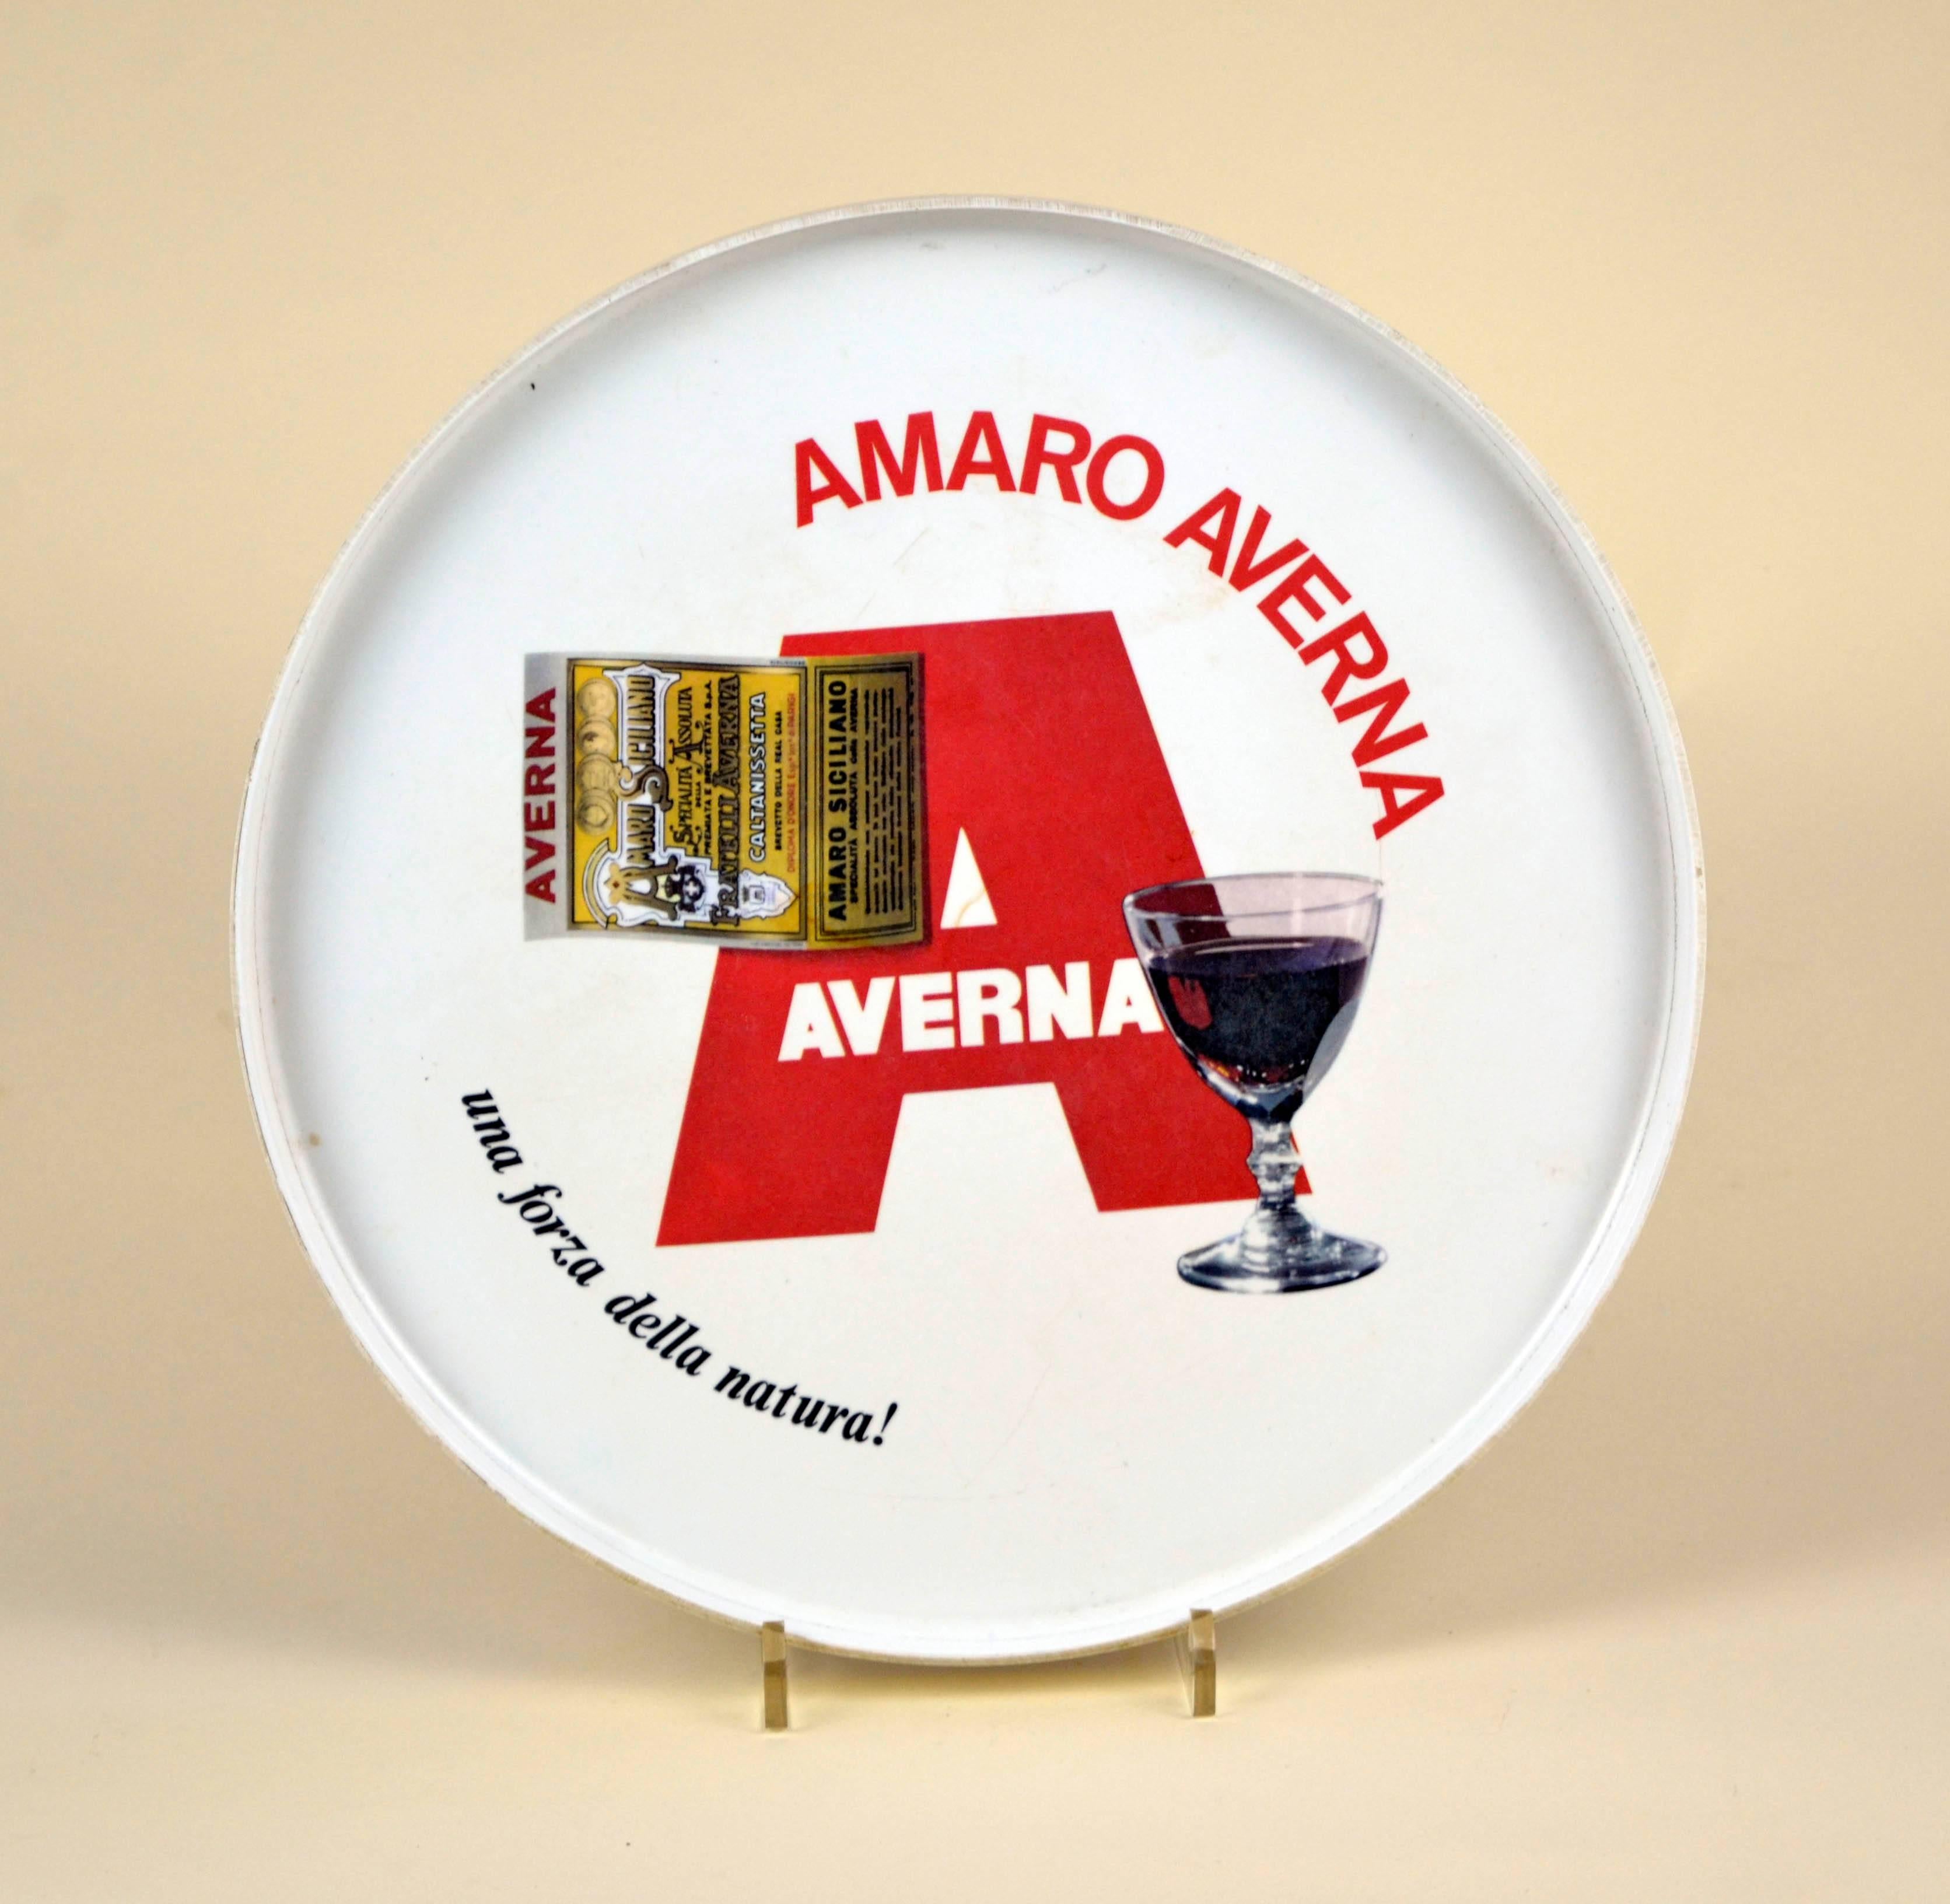 Vintage white plastic round bar tray made in Italy by Mabel for Amaro Averna.

The tray shows a large red latter A initial of Averna, the liqueur label and an image of a glass of Amaro Averna with the slogan 